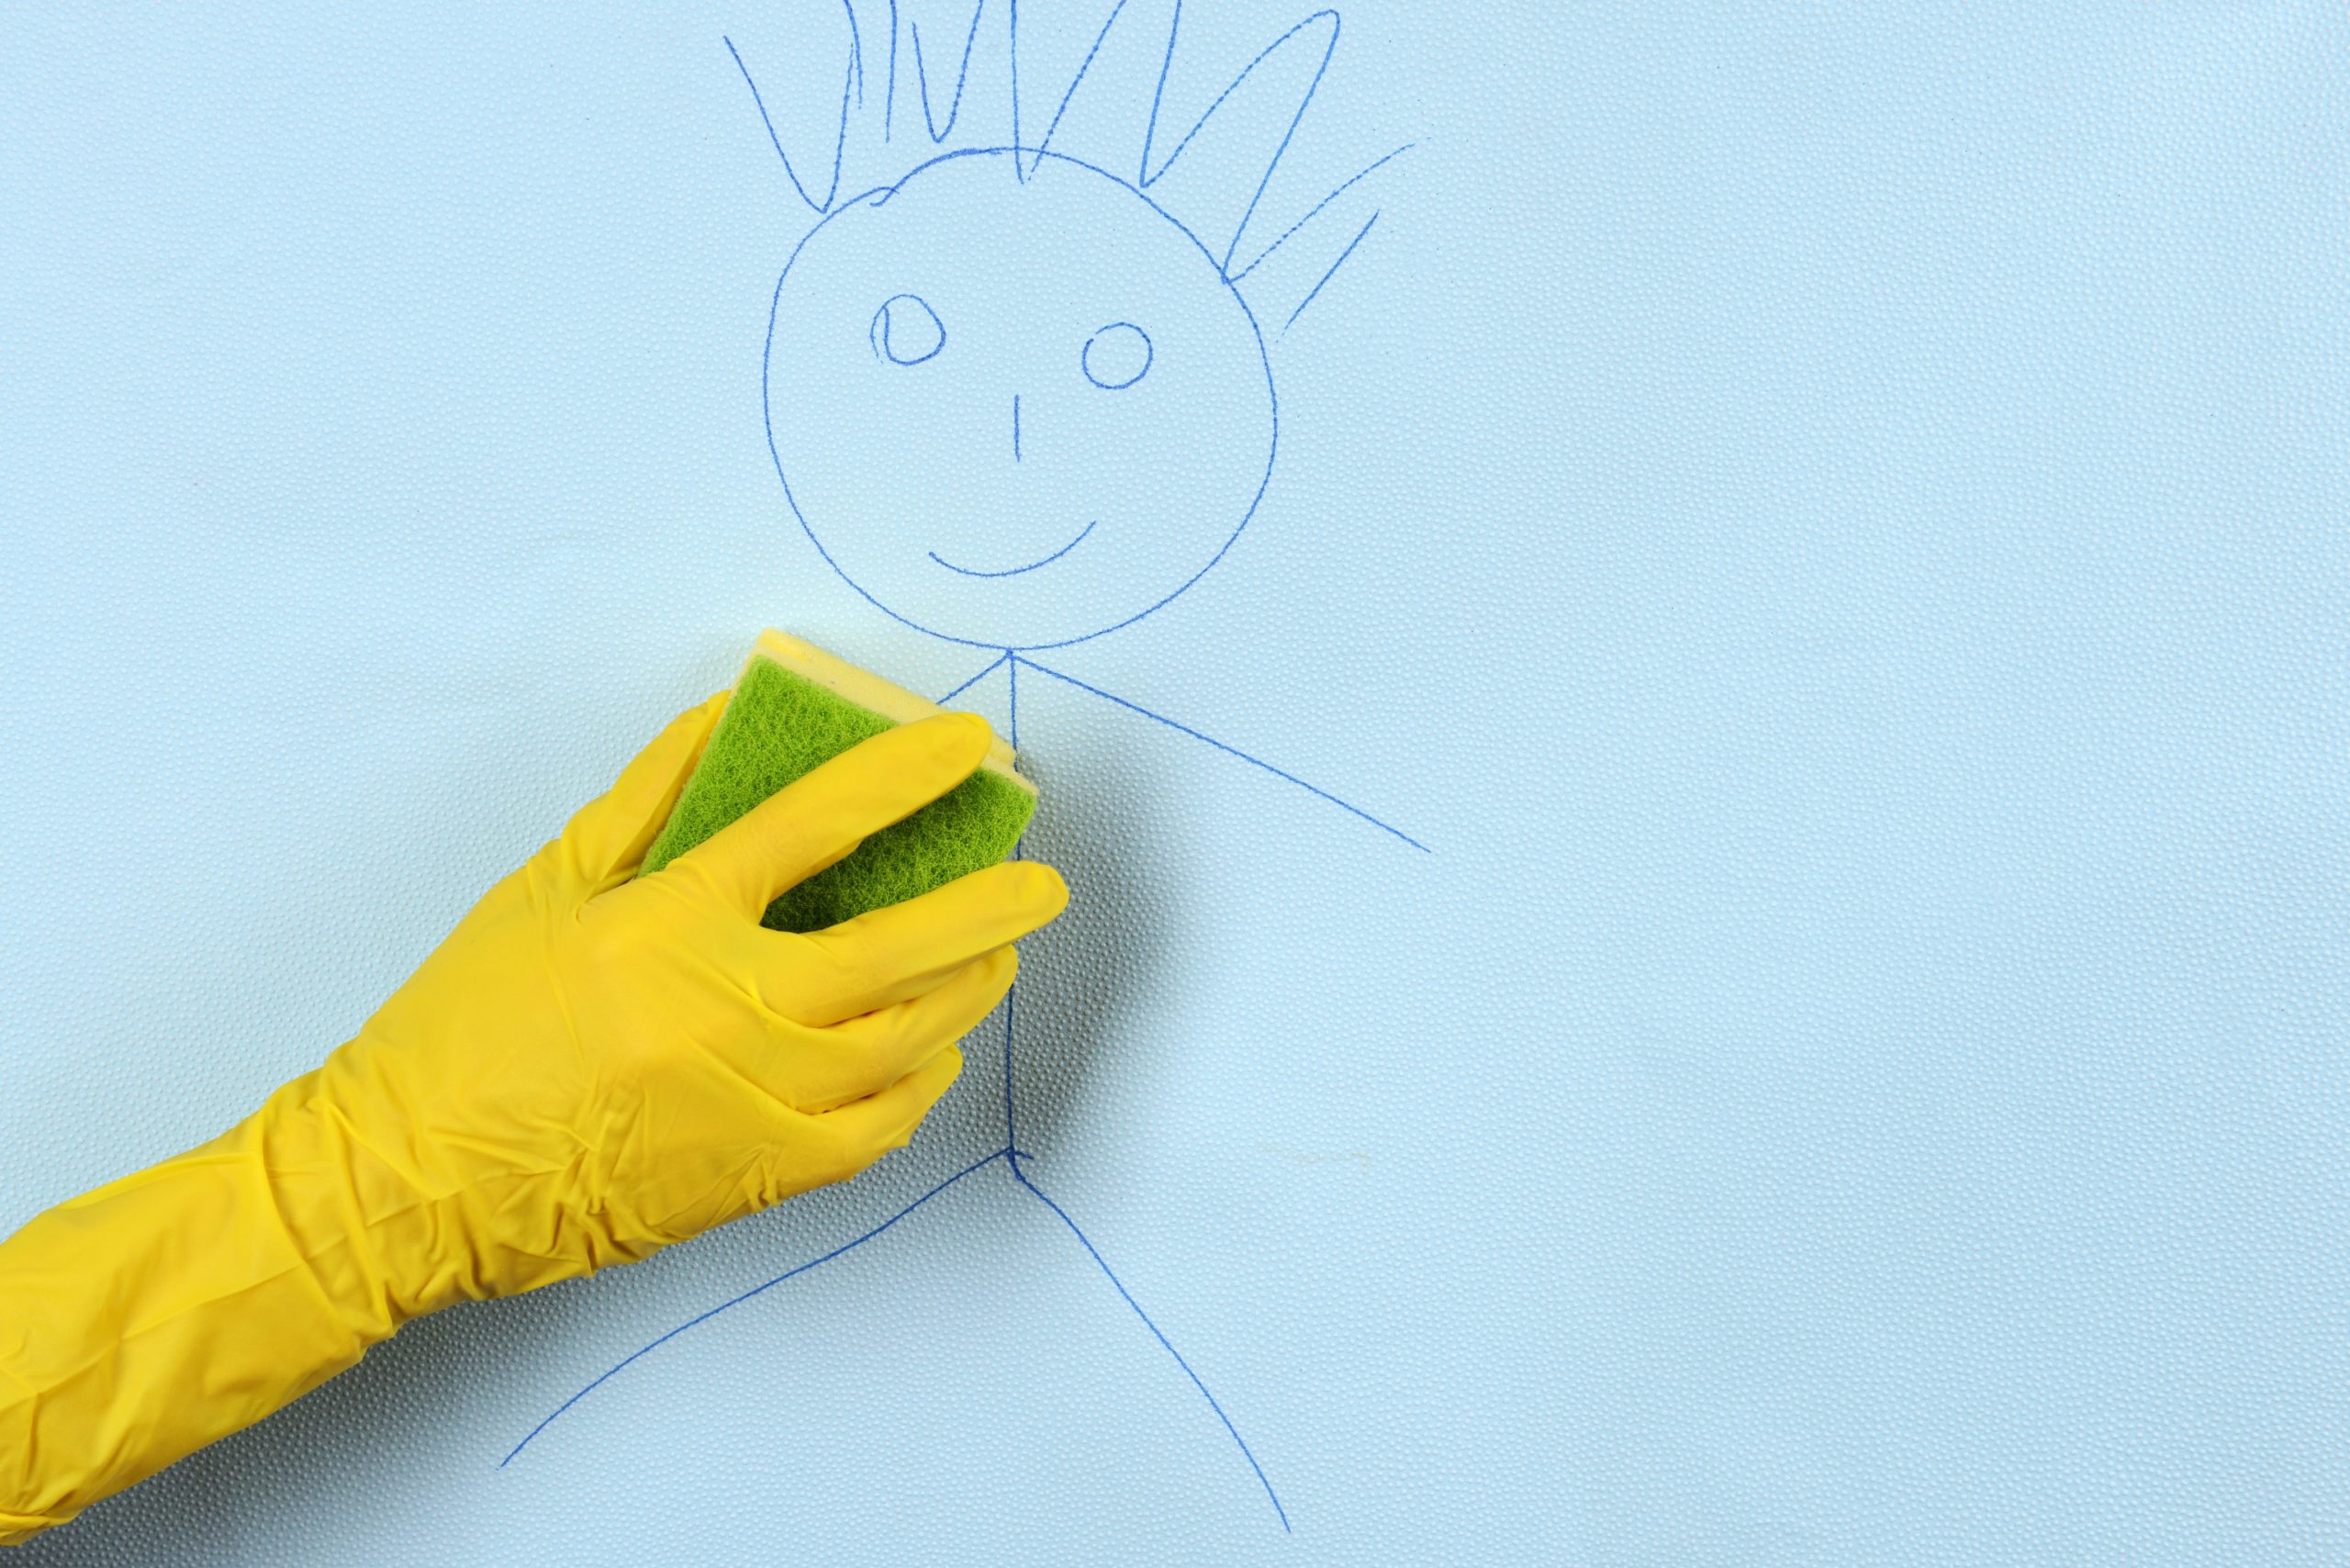 Someone wearing a yellow rubber cleaning glove using a sponge on crayon on the walls.